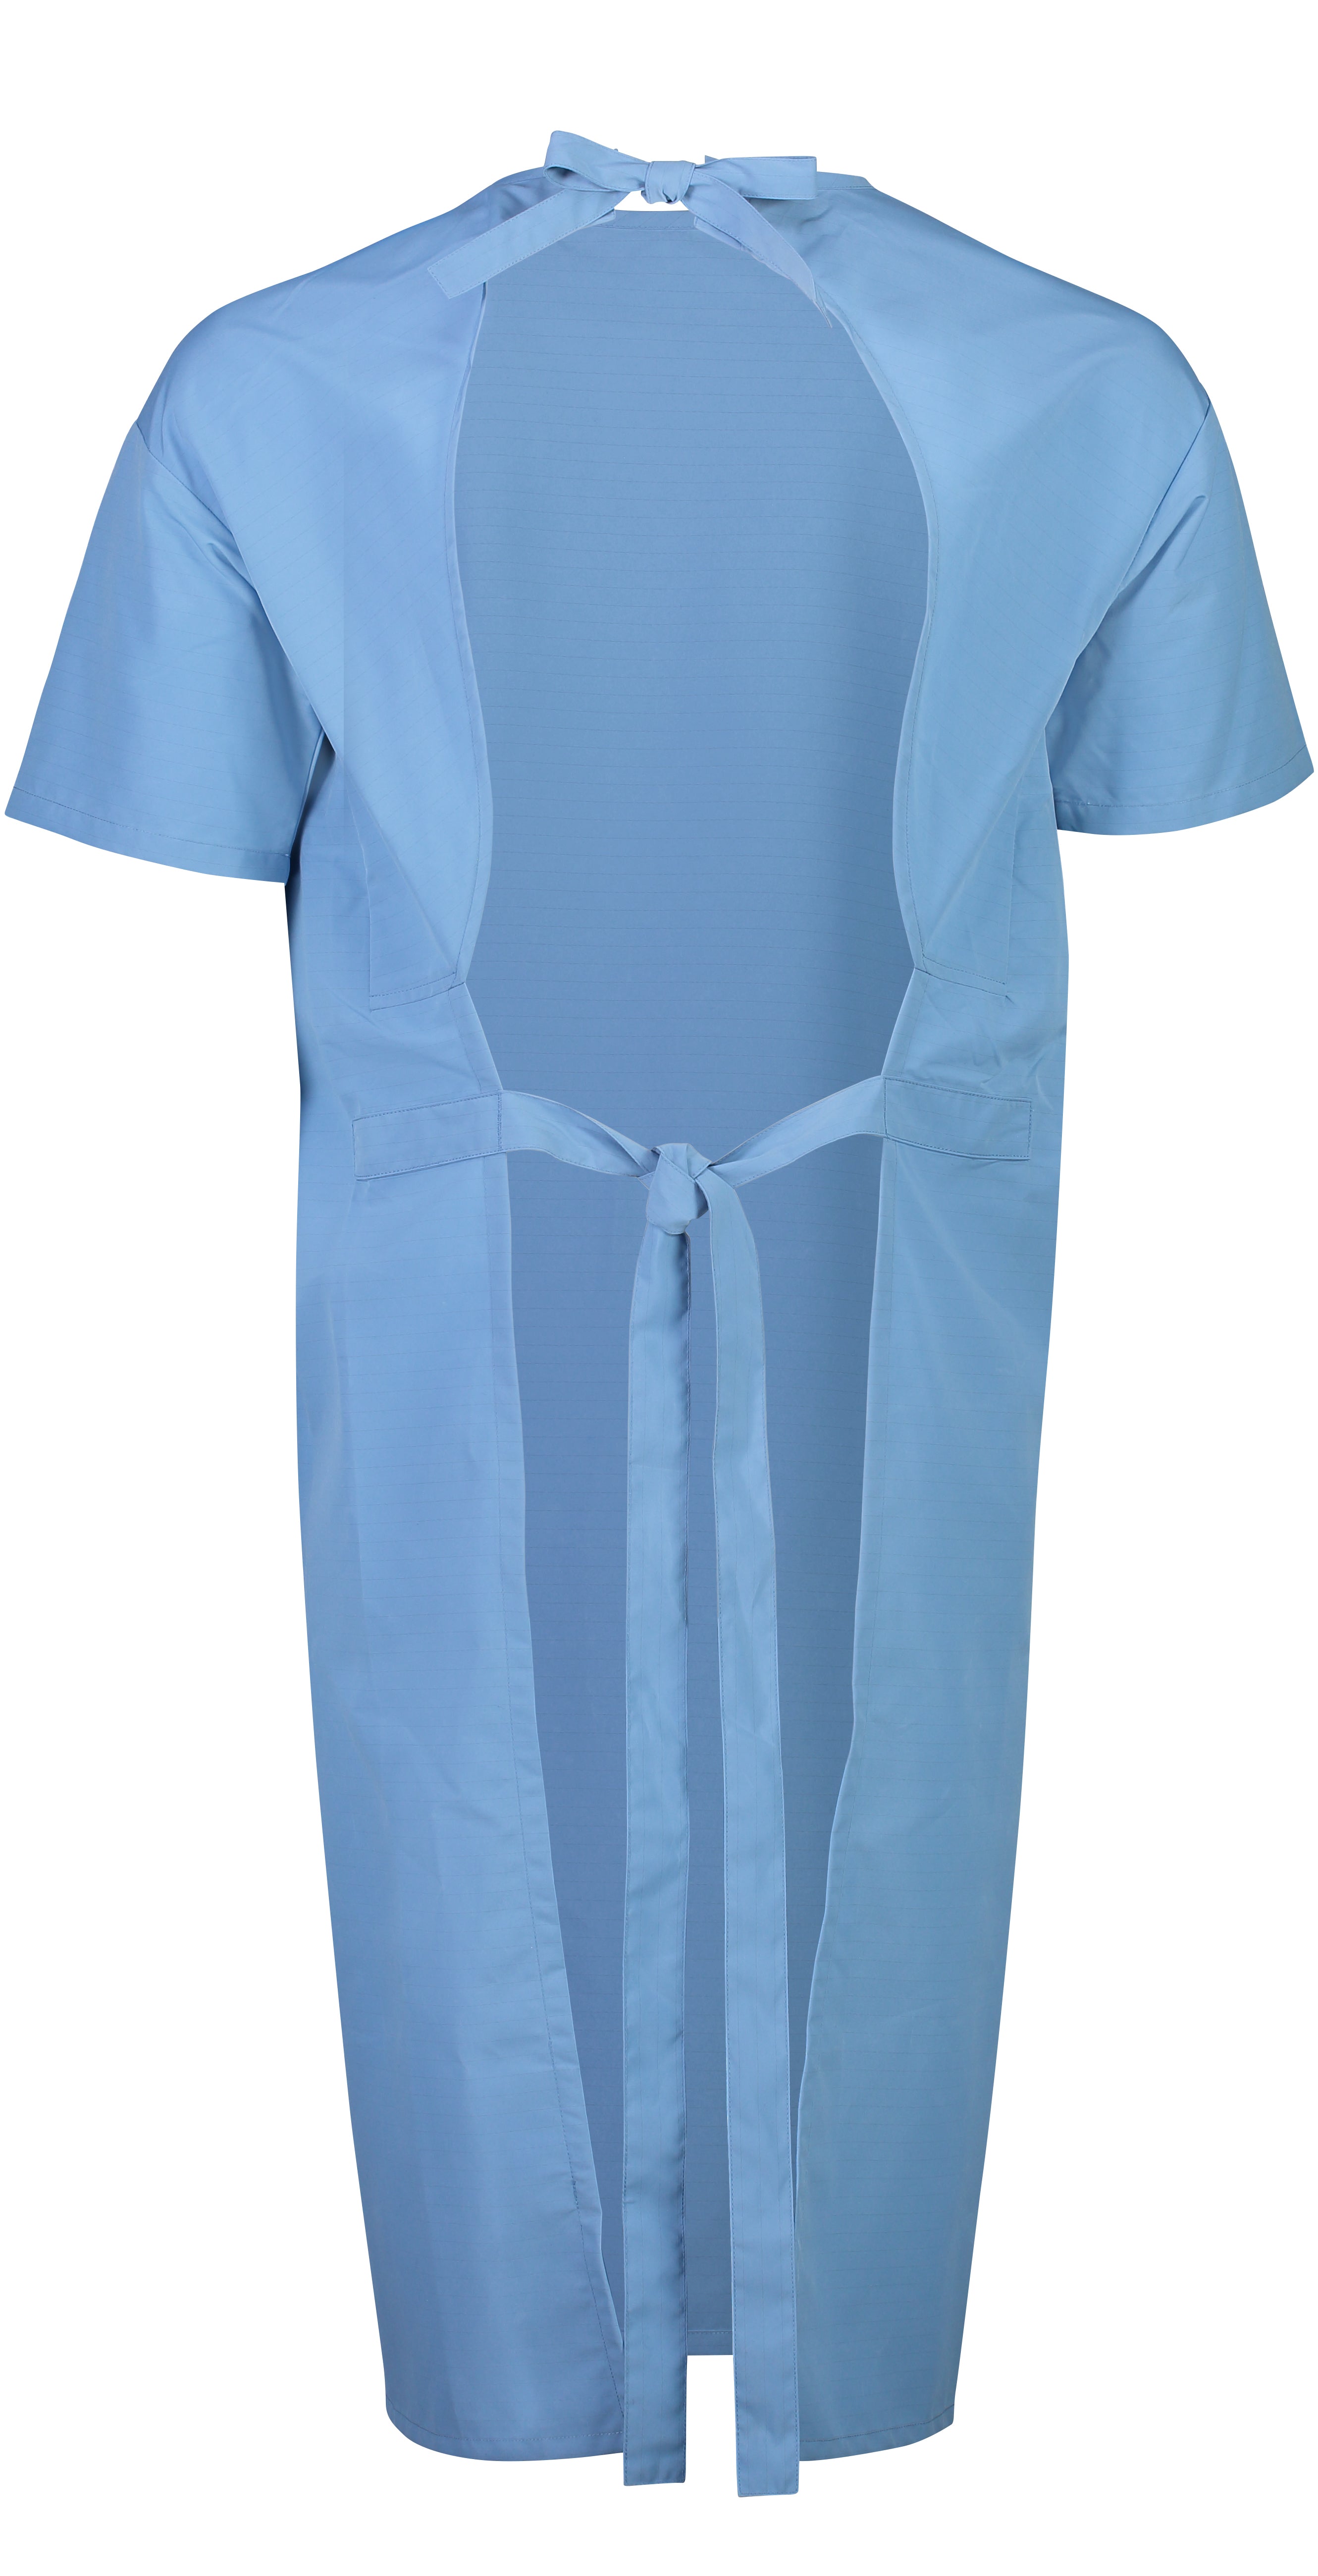 Blood Proof Washable Short Sleeve Gown